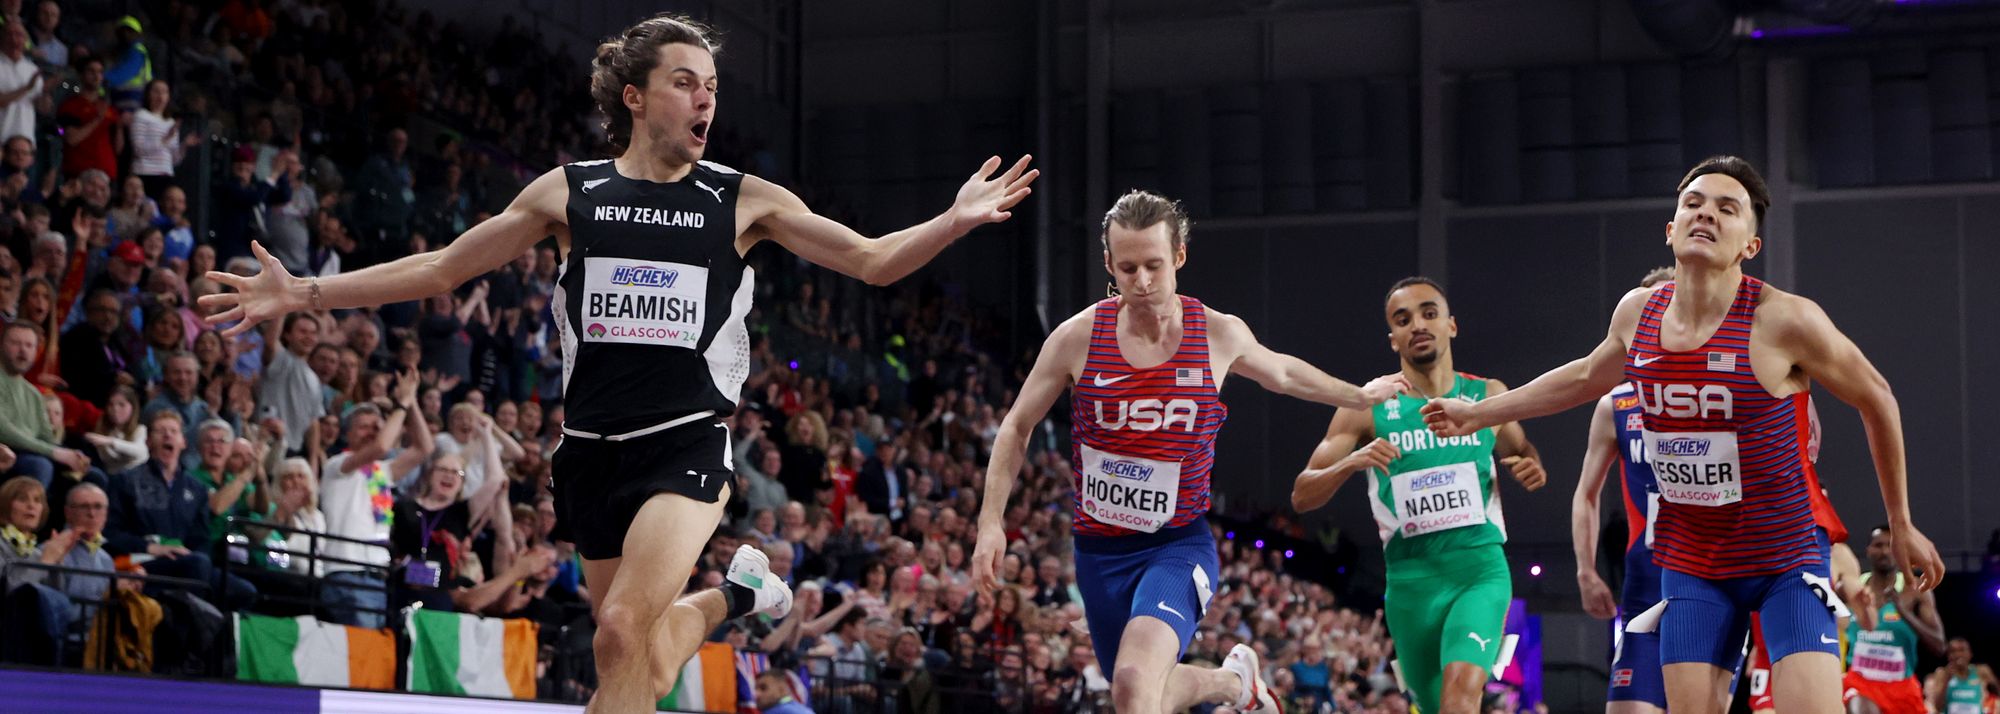 New Zealand’s Geordie Beamish produced an extraordinary finish to win the men’s 1500m title from lane three